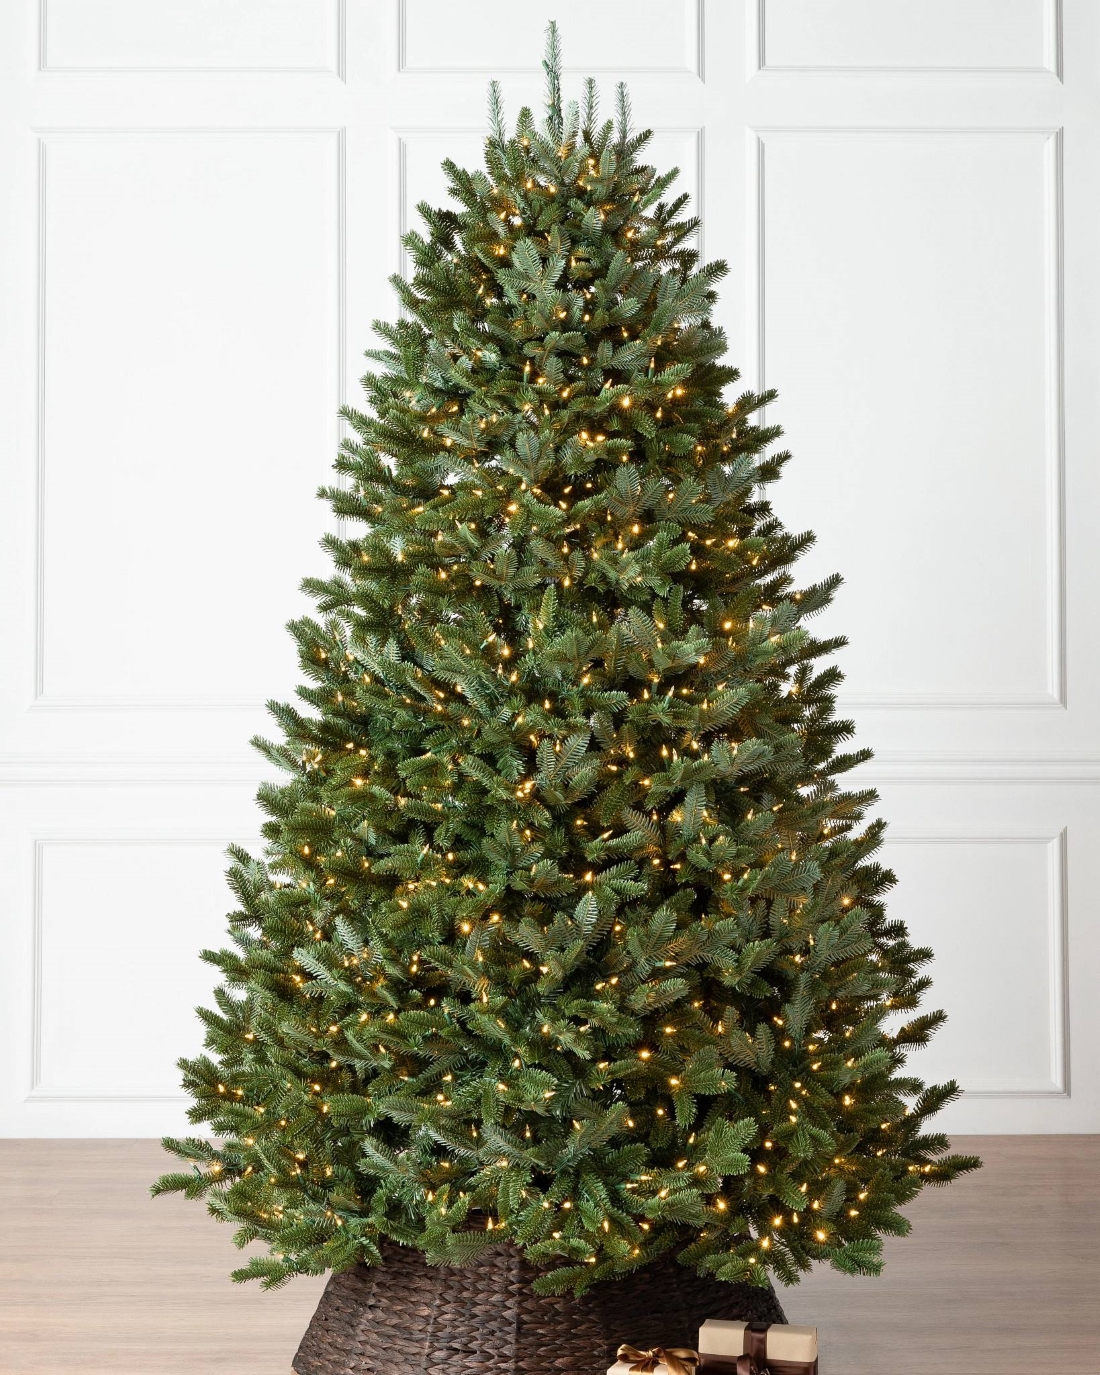 BalsamHill_Realistic_best selling christmas trees